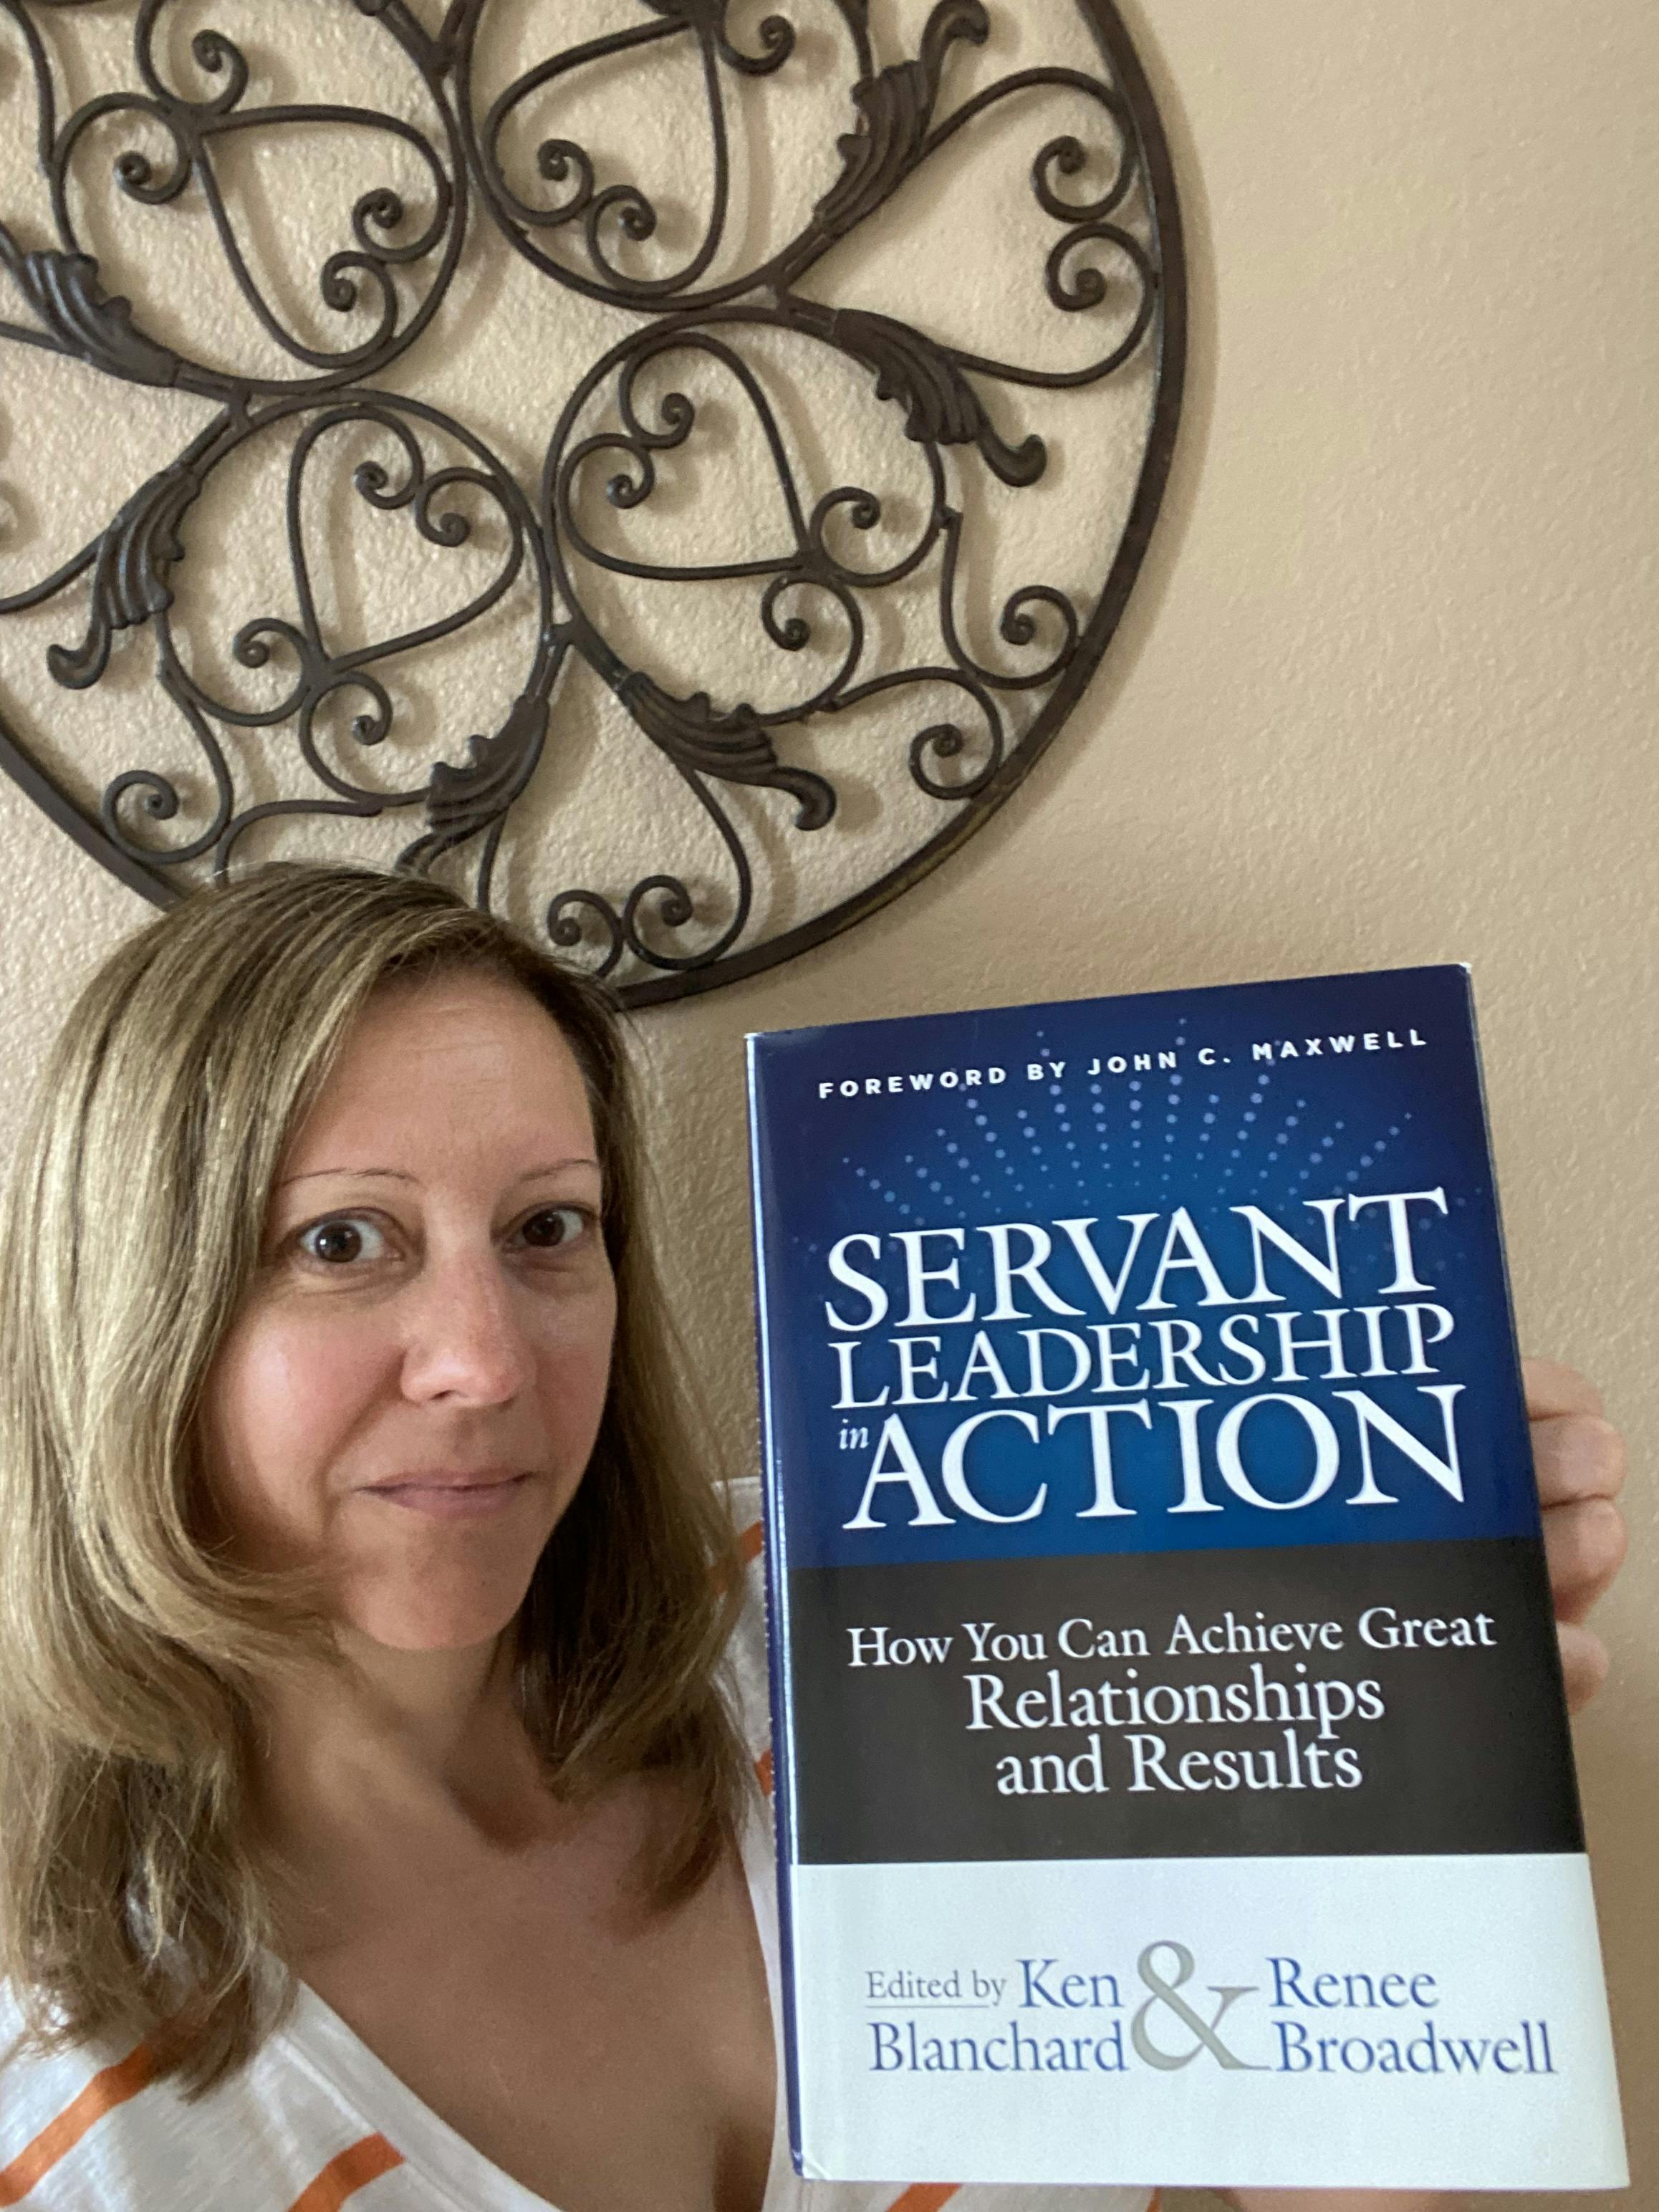 Stephanie holding up the book "Servant Leadership in Action" edited by Ken Blanchard & Renee Broadwell 